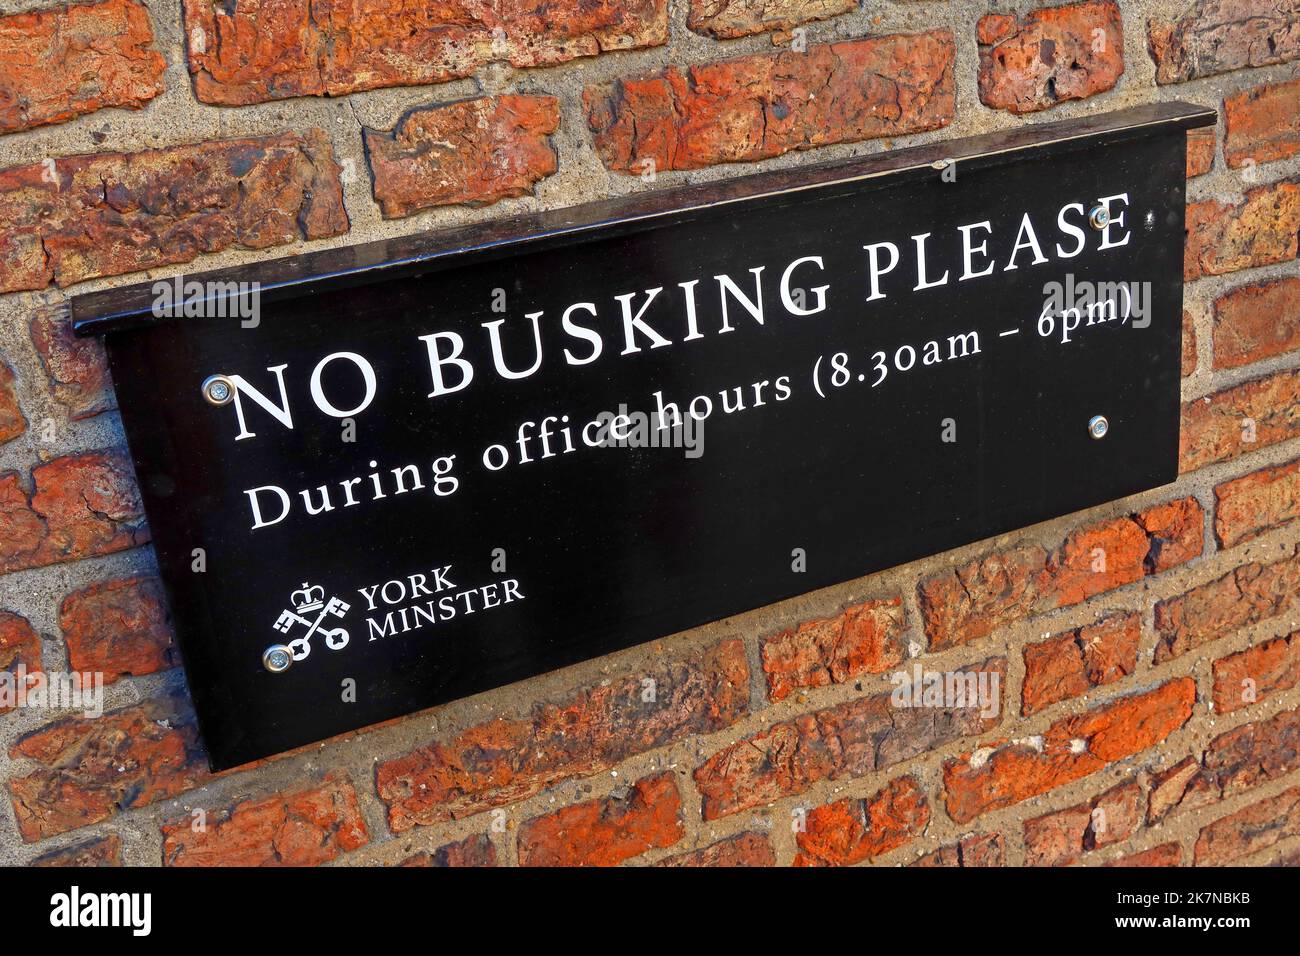 No busking please, during working hours (8:30am - 6pm) sign, near York Minster, City of York, Yorkshire, England, UK, YO1 6GD Stock Photo